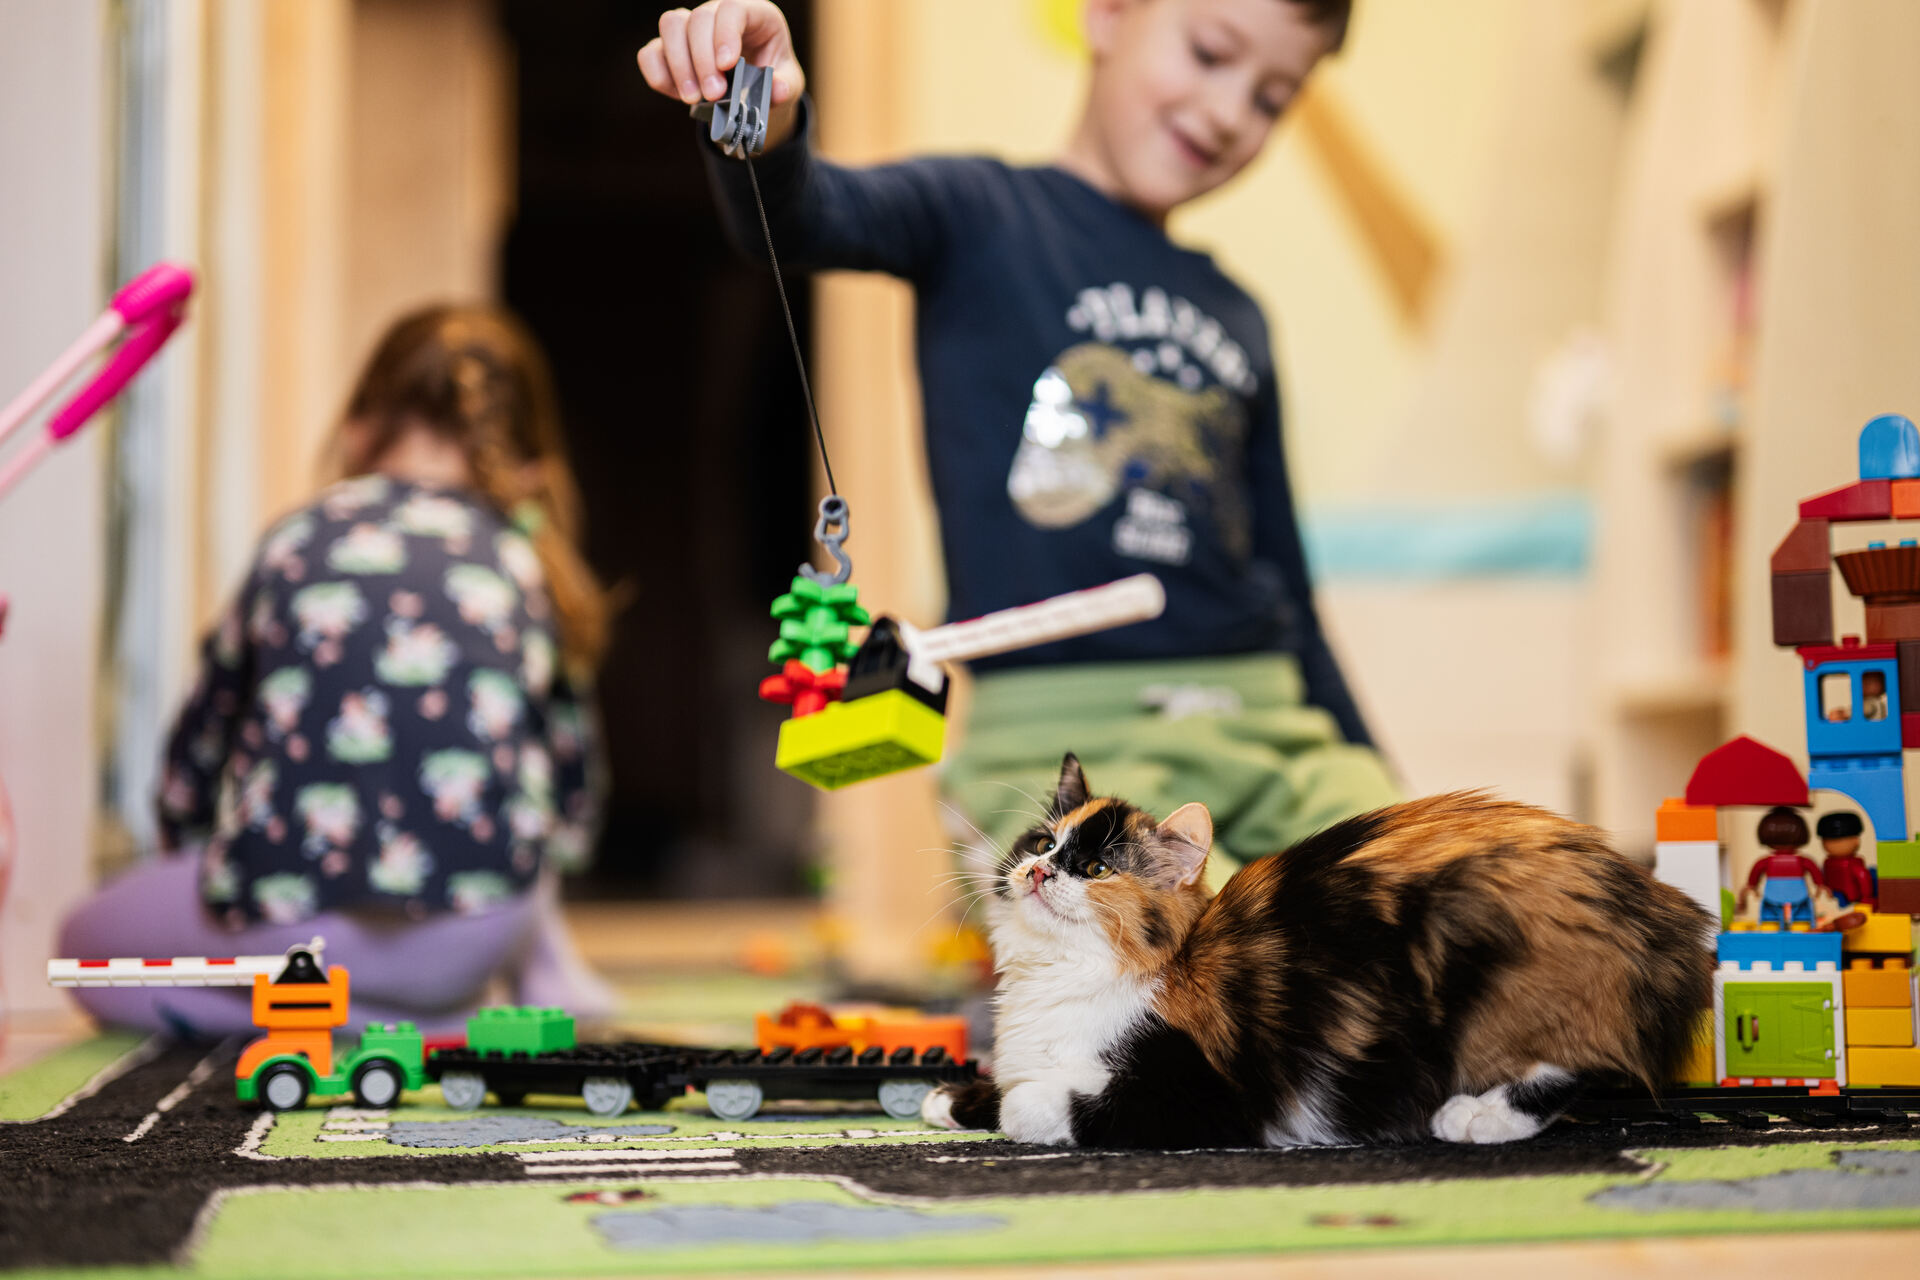 A young boy swinging a toy in front of a cat